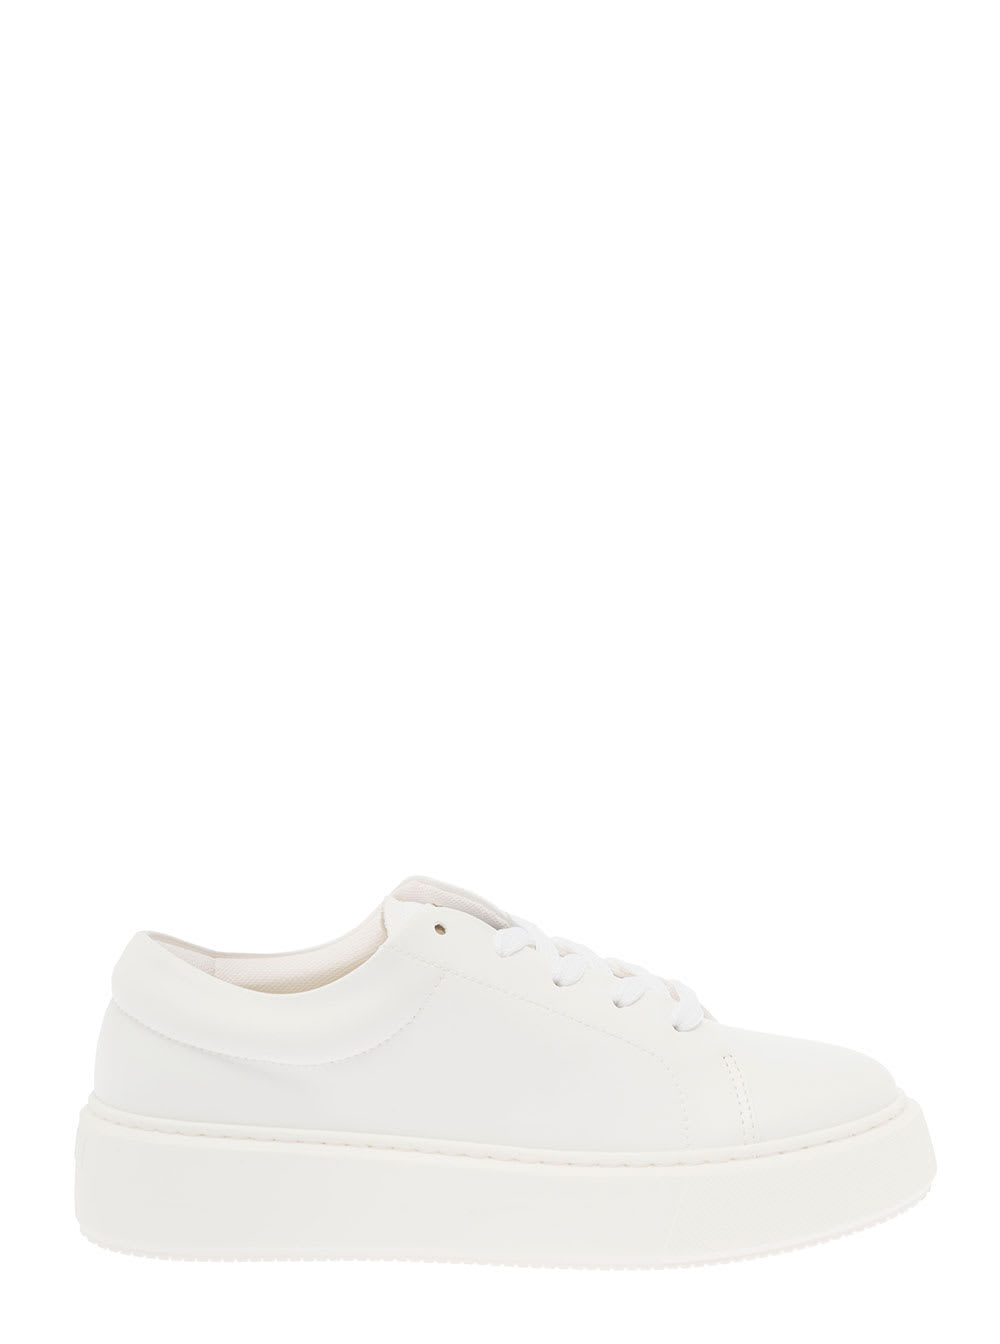 Ganni Womans White Faux Leather Sporty Mix Sneakers